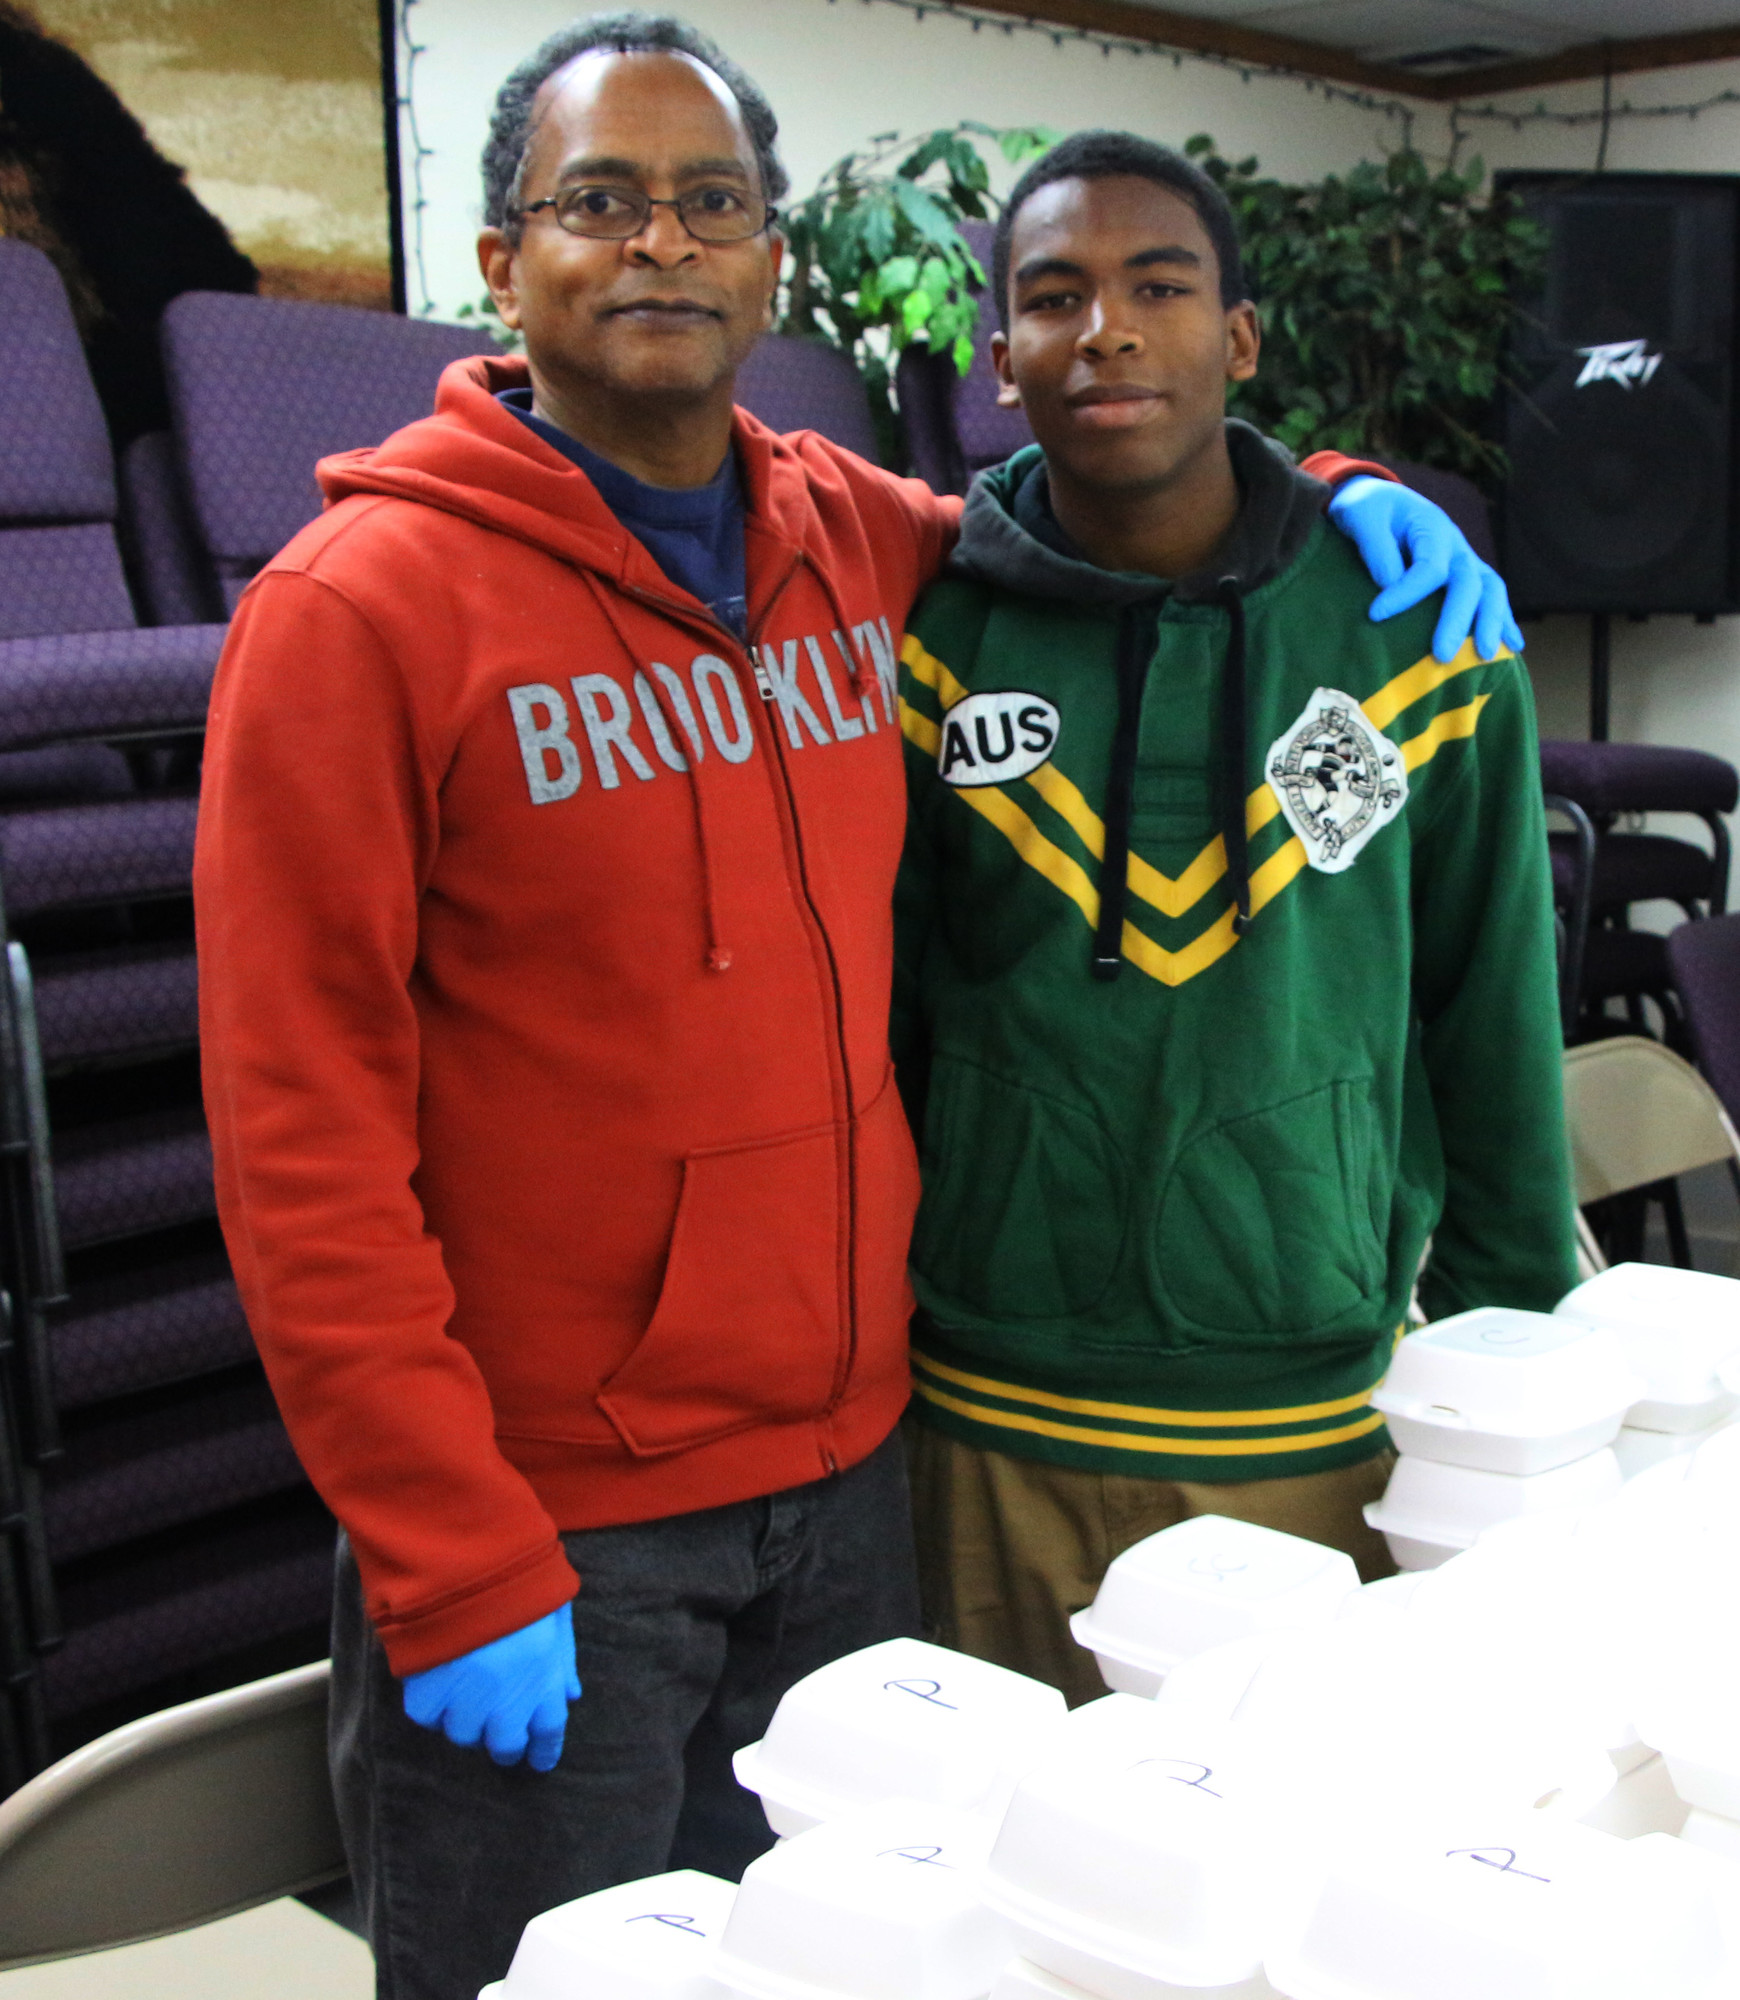 Jeffrey St. Clair and his son Keenan volunteered during the Thanksgiving holiday.